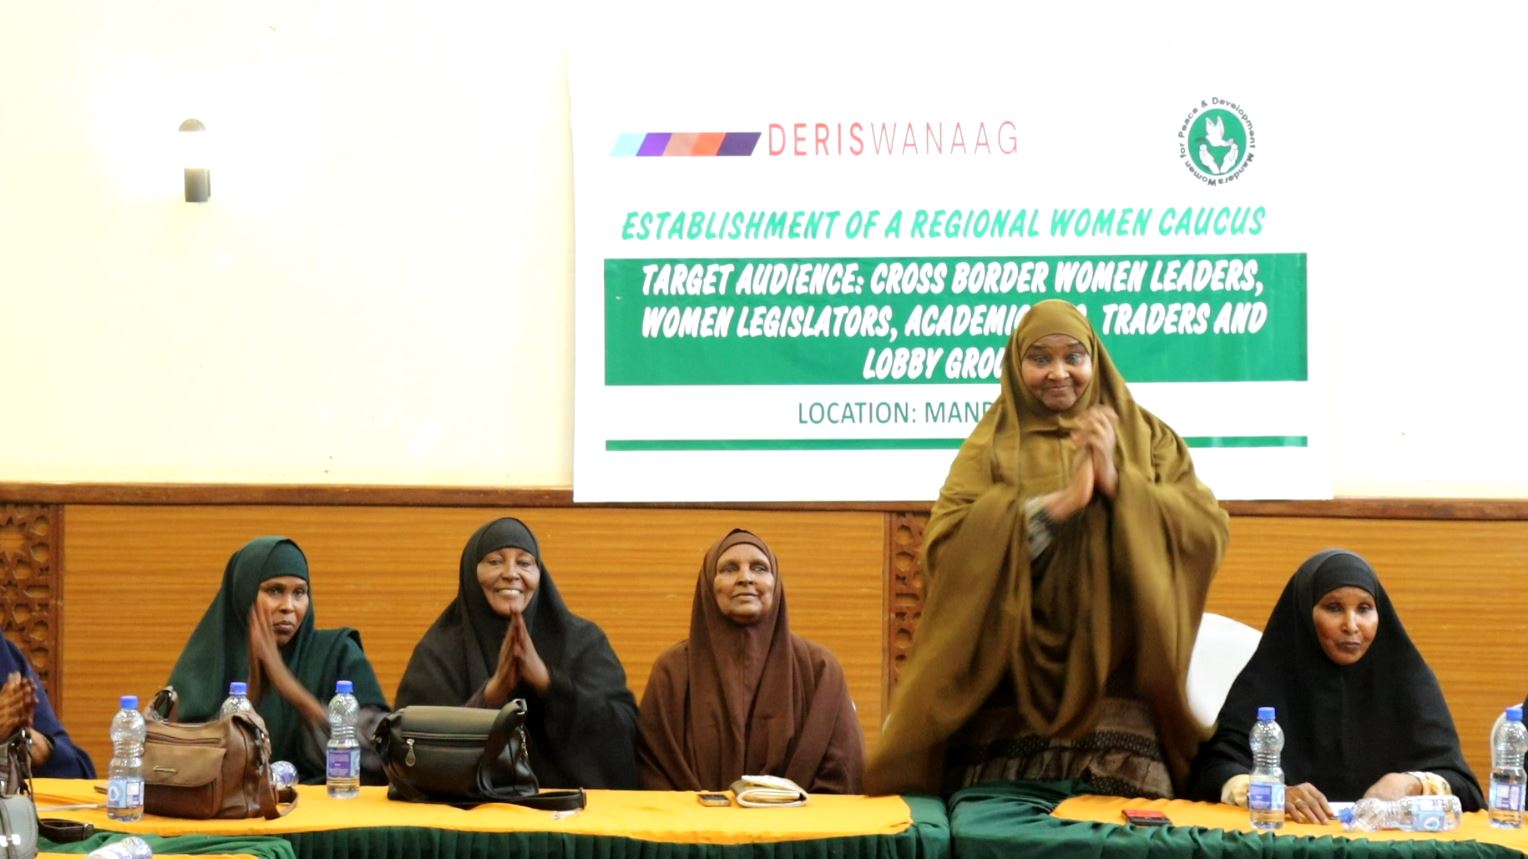 Regional women's caucus formed to enhance peacebuilding and cross-border trade